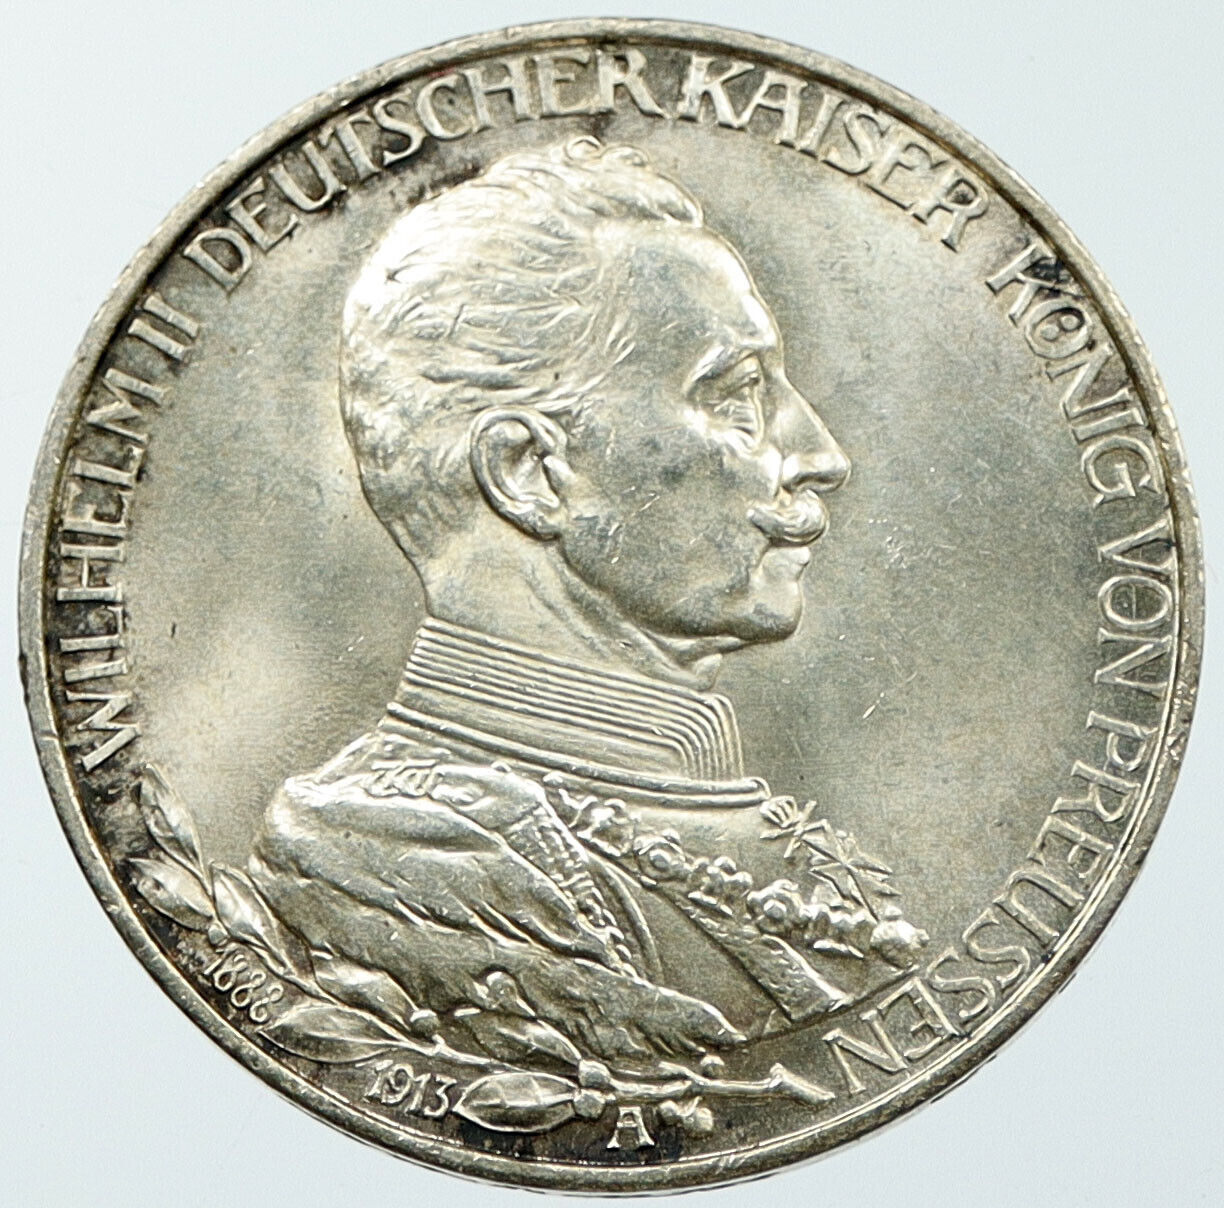 1913 A GERMANY GERMAN STATES PRUSSIA WILHELM II Old Silver 3 Marks Coin i116632